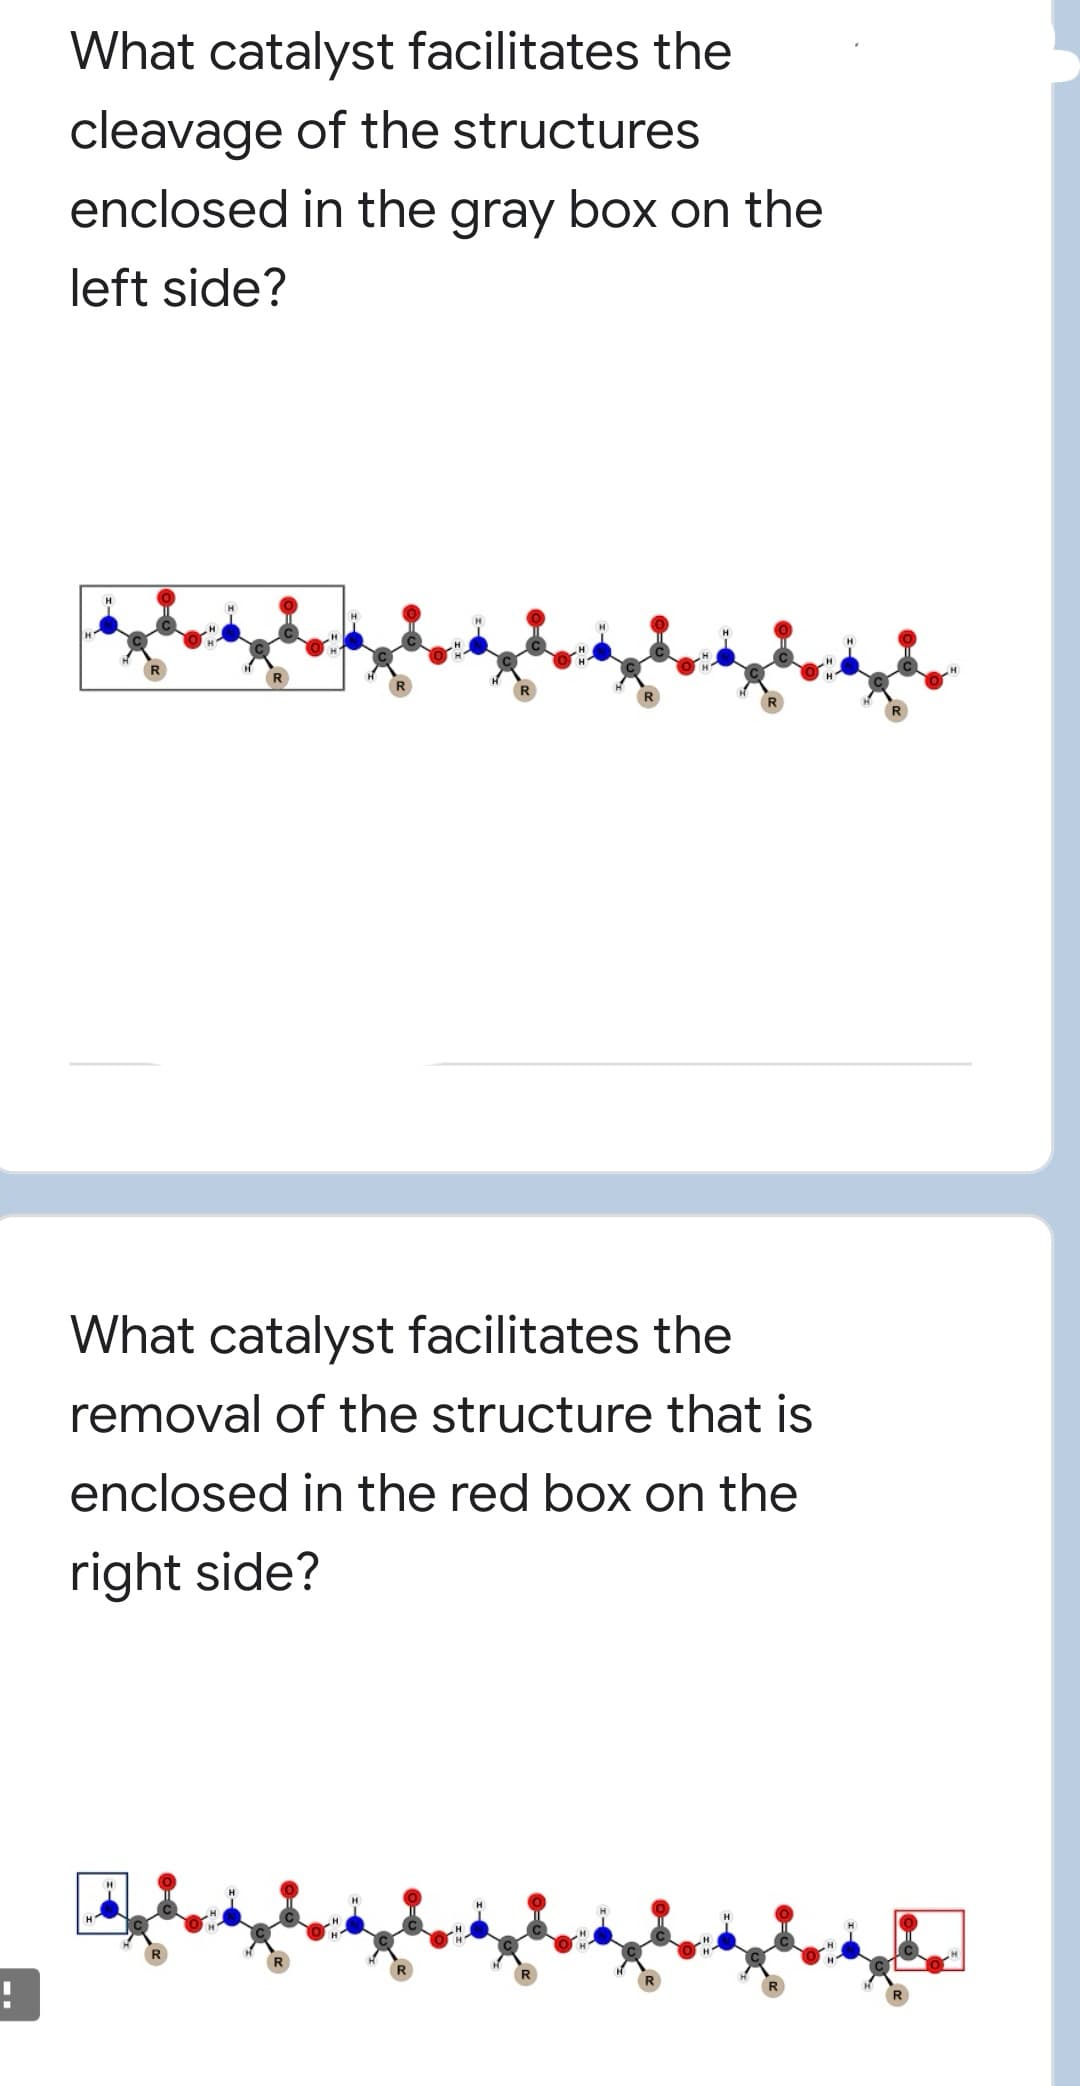 What catalyst facilitates the
cleavage of the structures
enclosed in the gray box on the
left side?
What catalyst facilitates the
removal of the structure that is
enclosed in the red box on the
right side?
